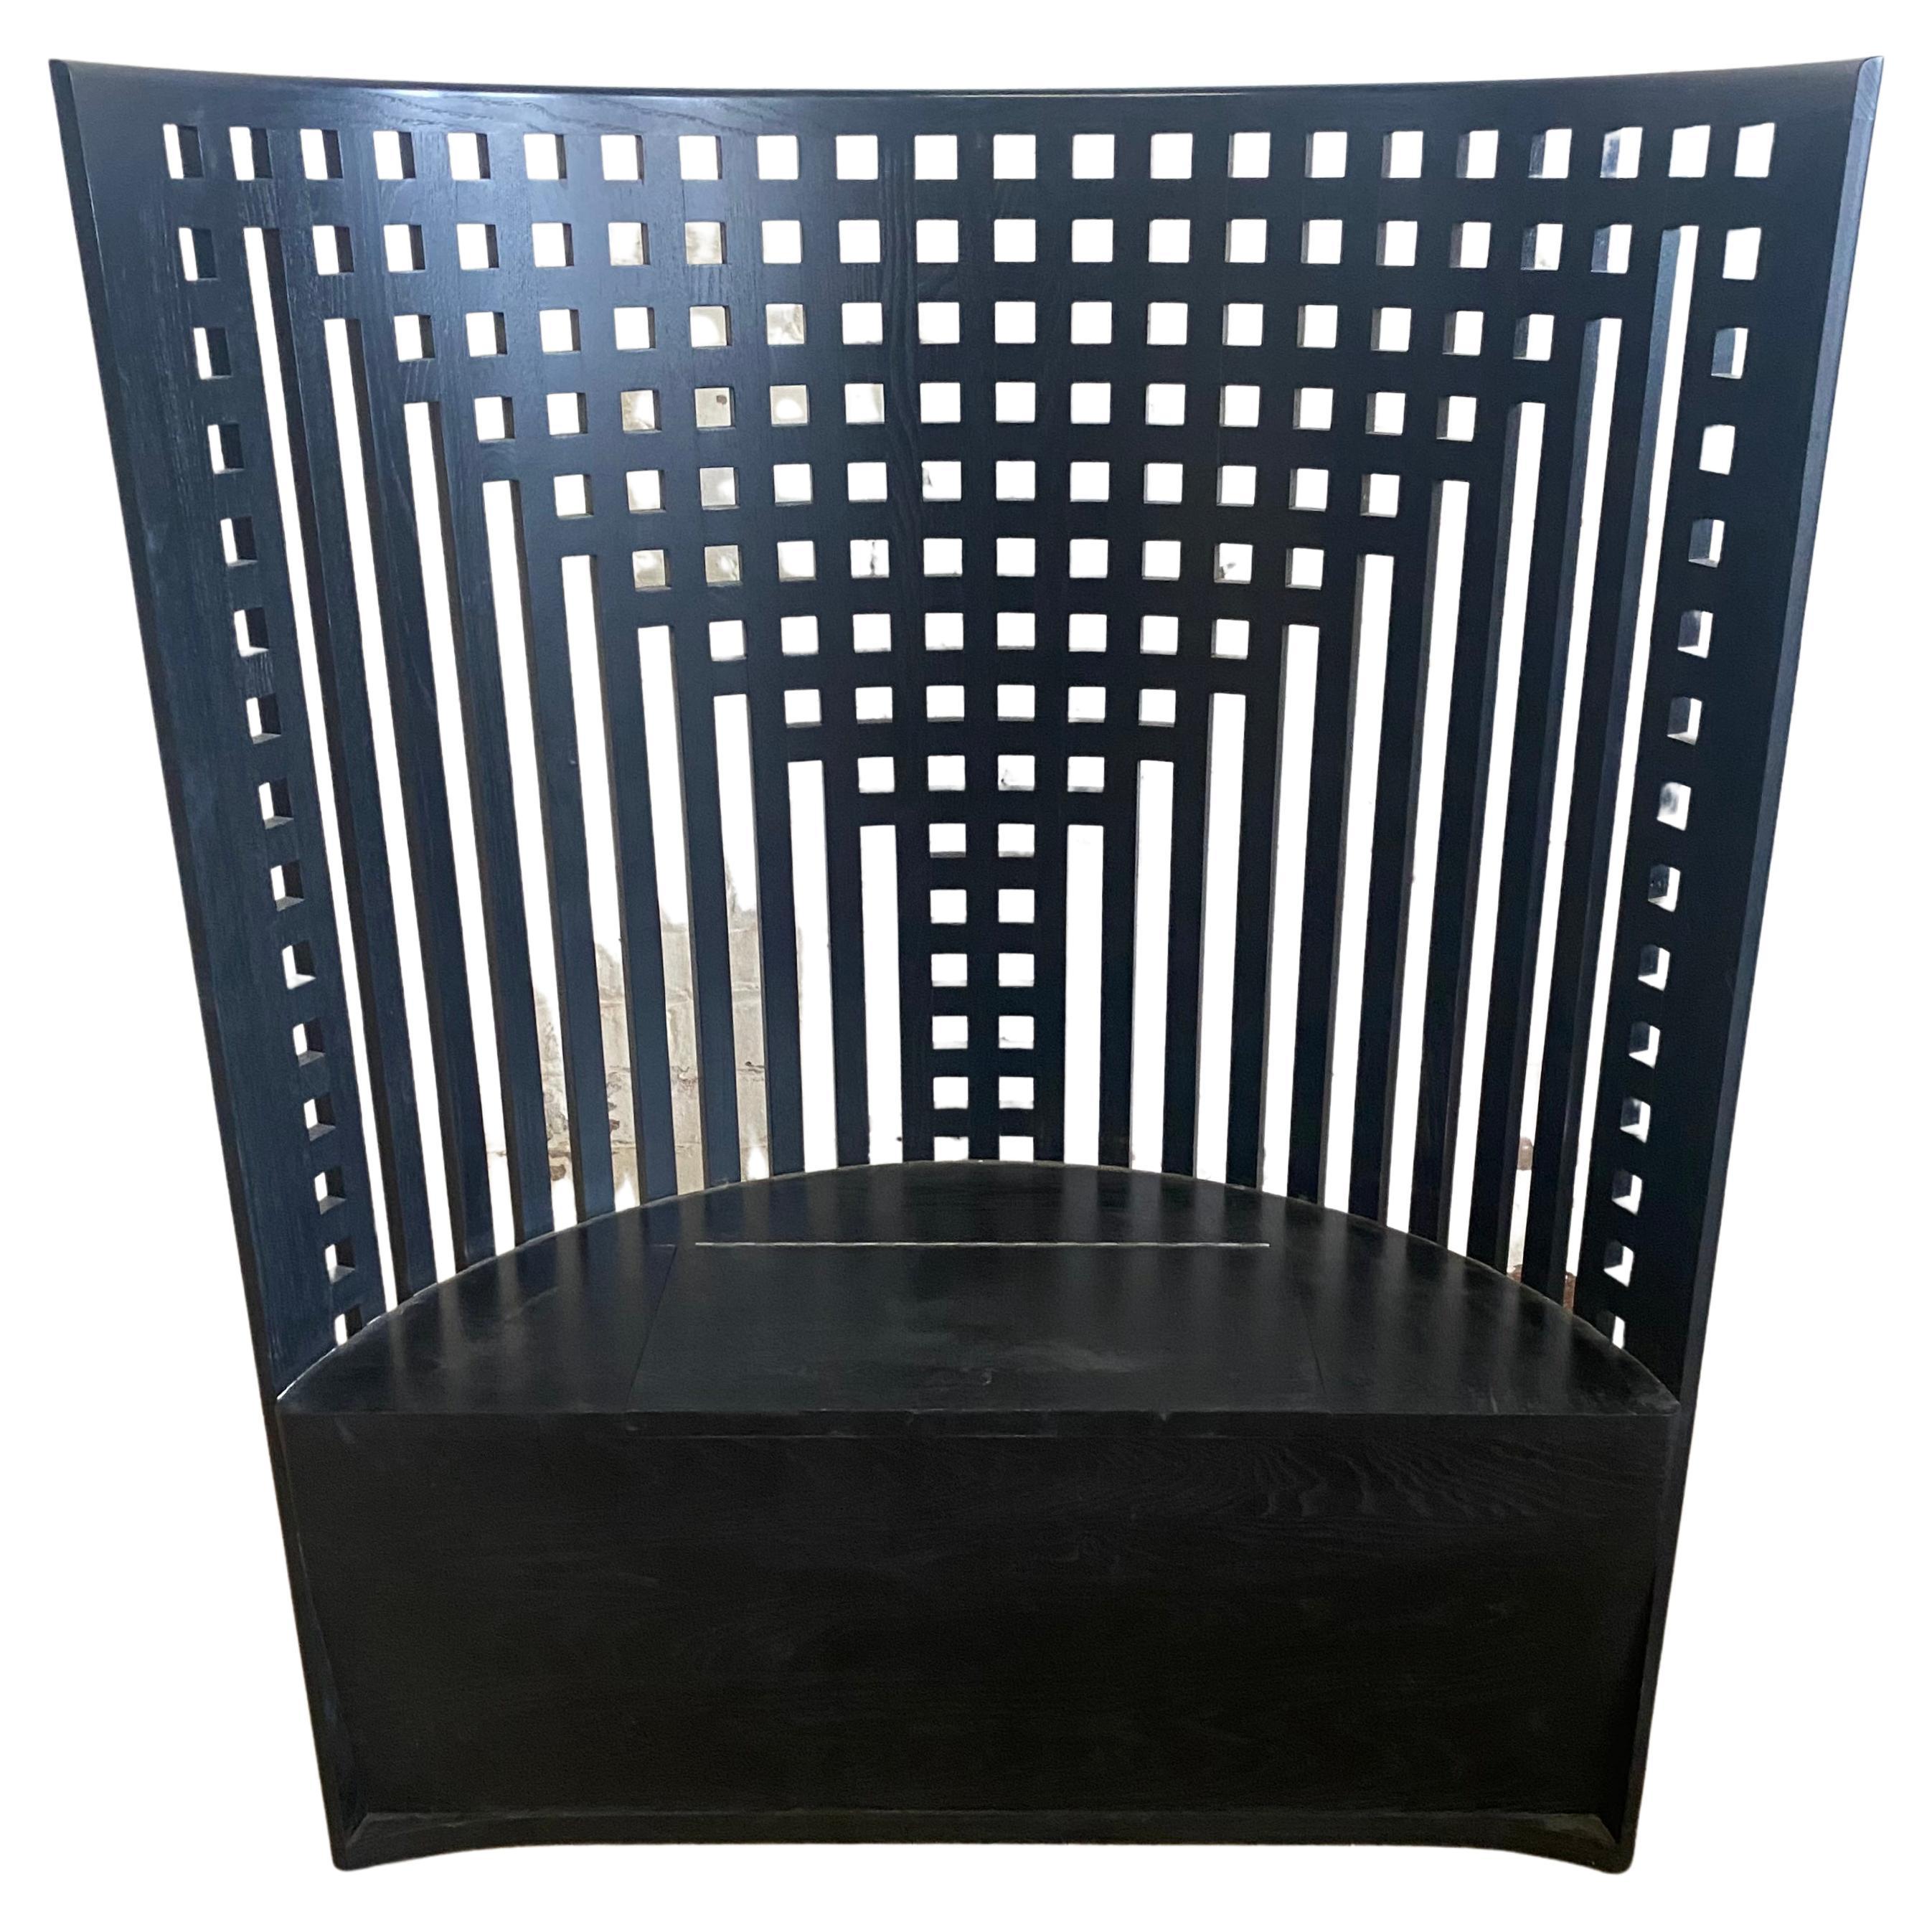 Trone -armchair designed by Charles Rennie Macintosh in 1904, Relaunched in 1973 , manufactured by Cassina in Italy..

This throne-like armchair is a later iteration of the model that CRM donated in 1904 to th 